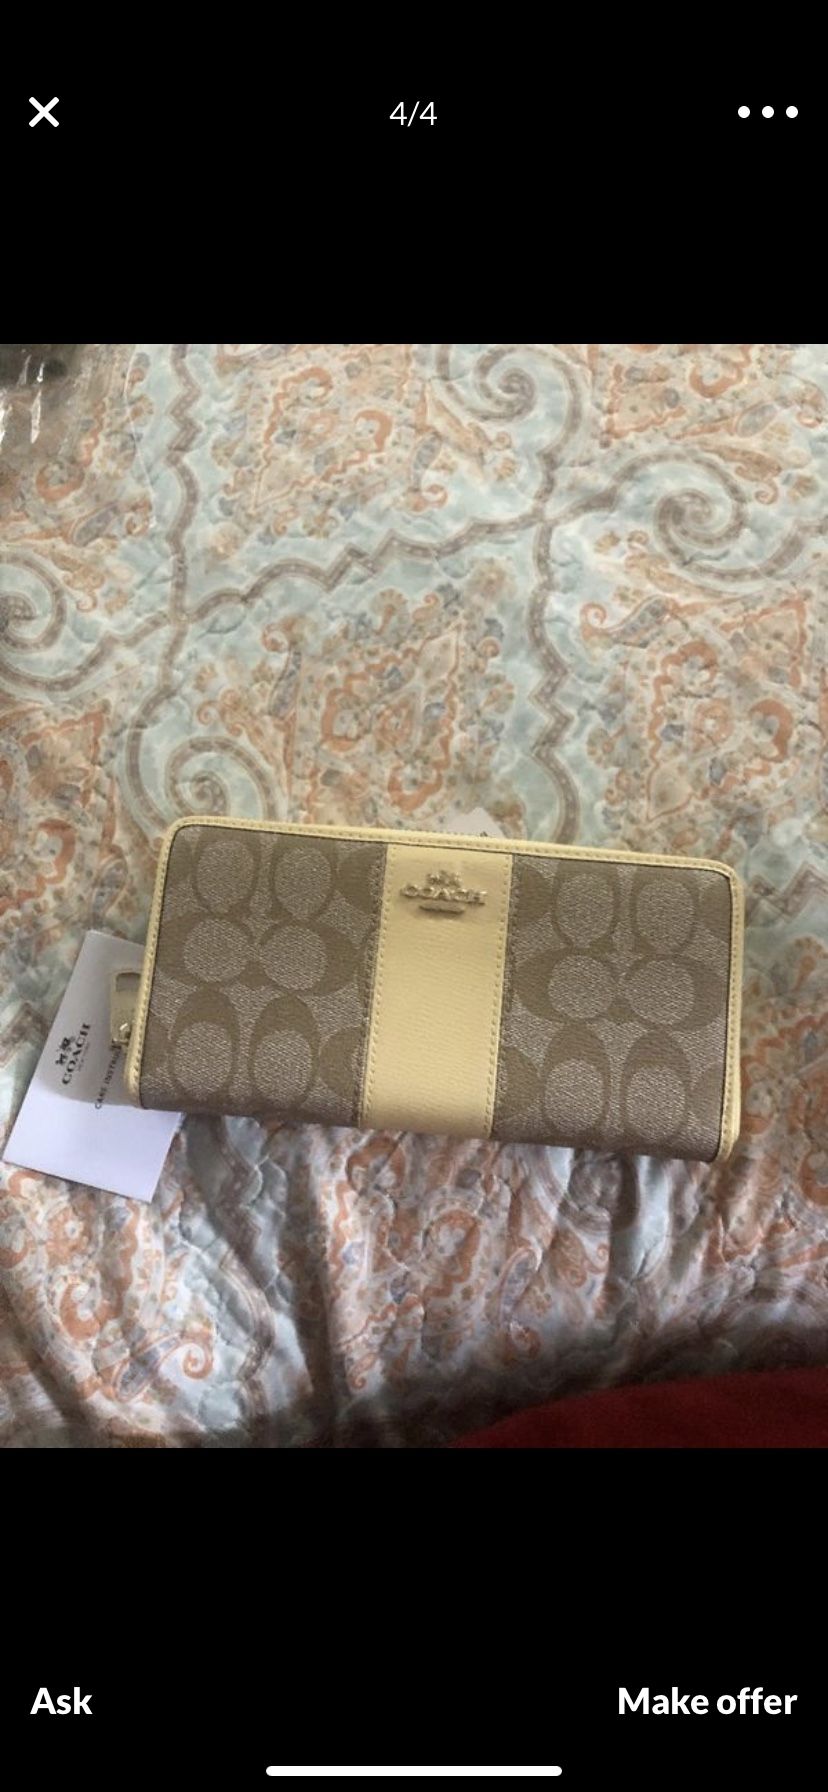 New with tag coach wallet yellow